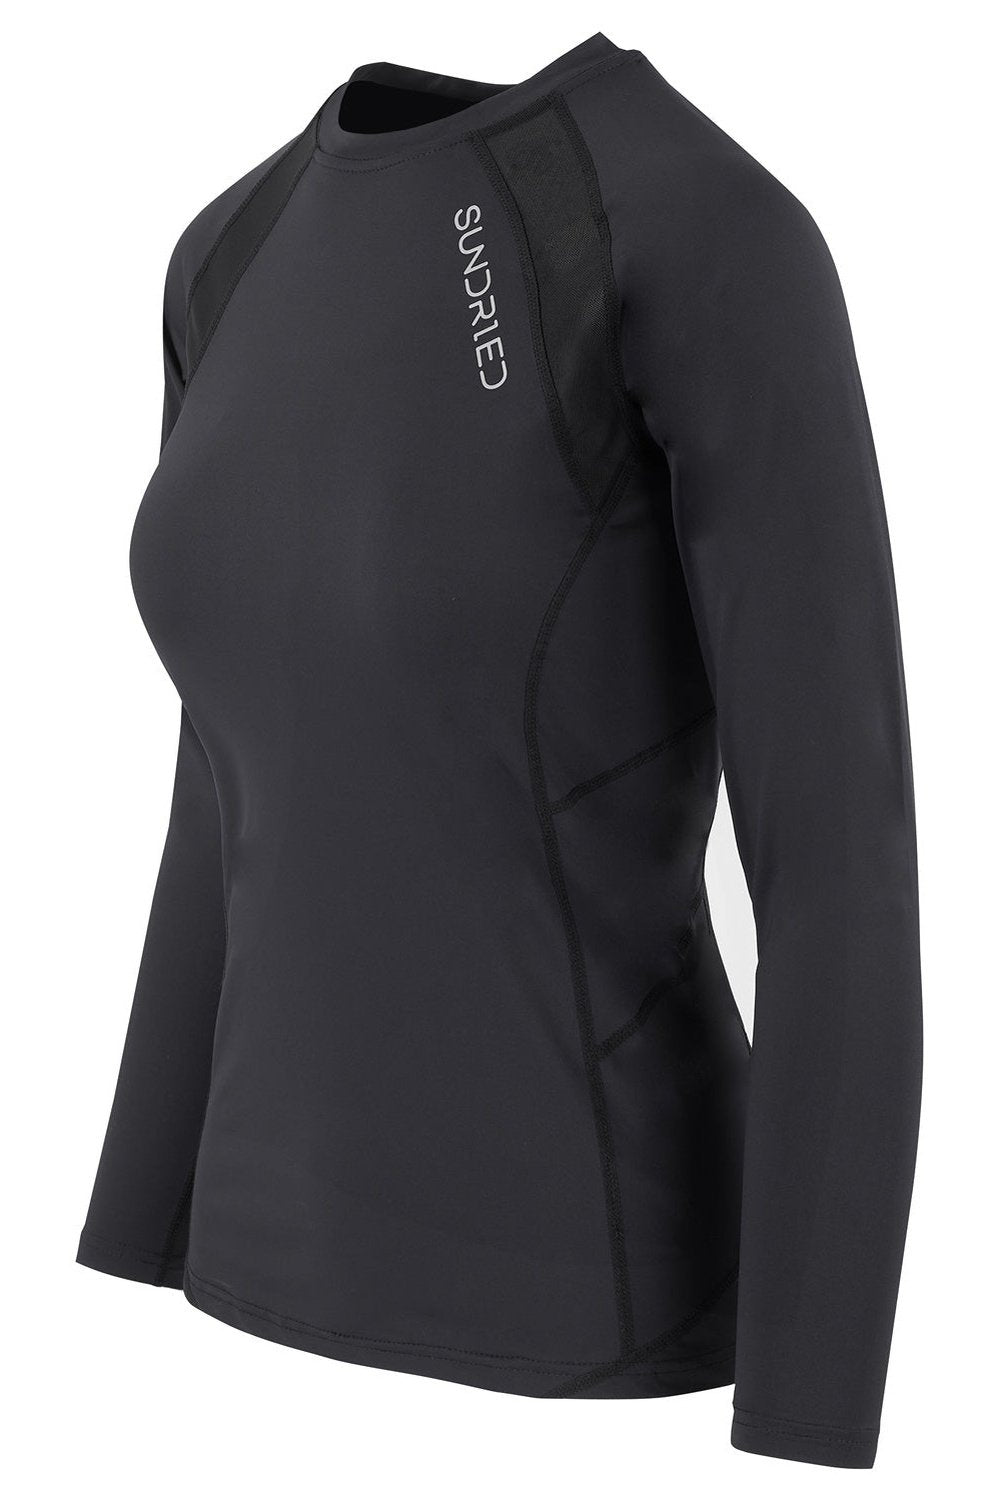 Sundried Women's Mesh Back Compression Style Top Baselayer Activewear